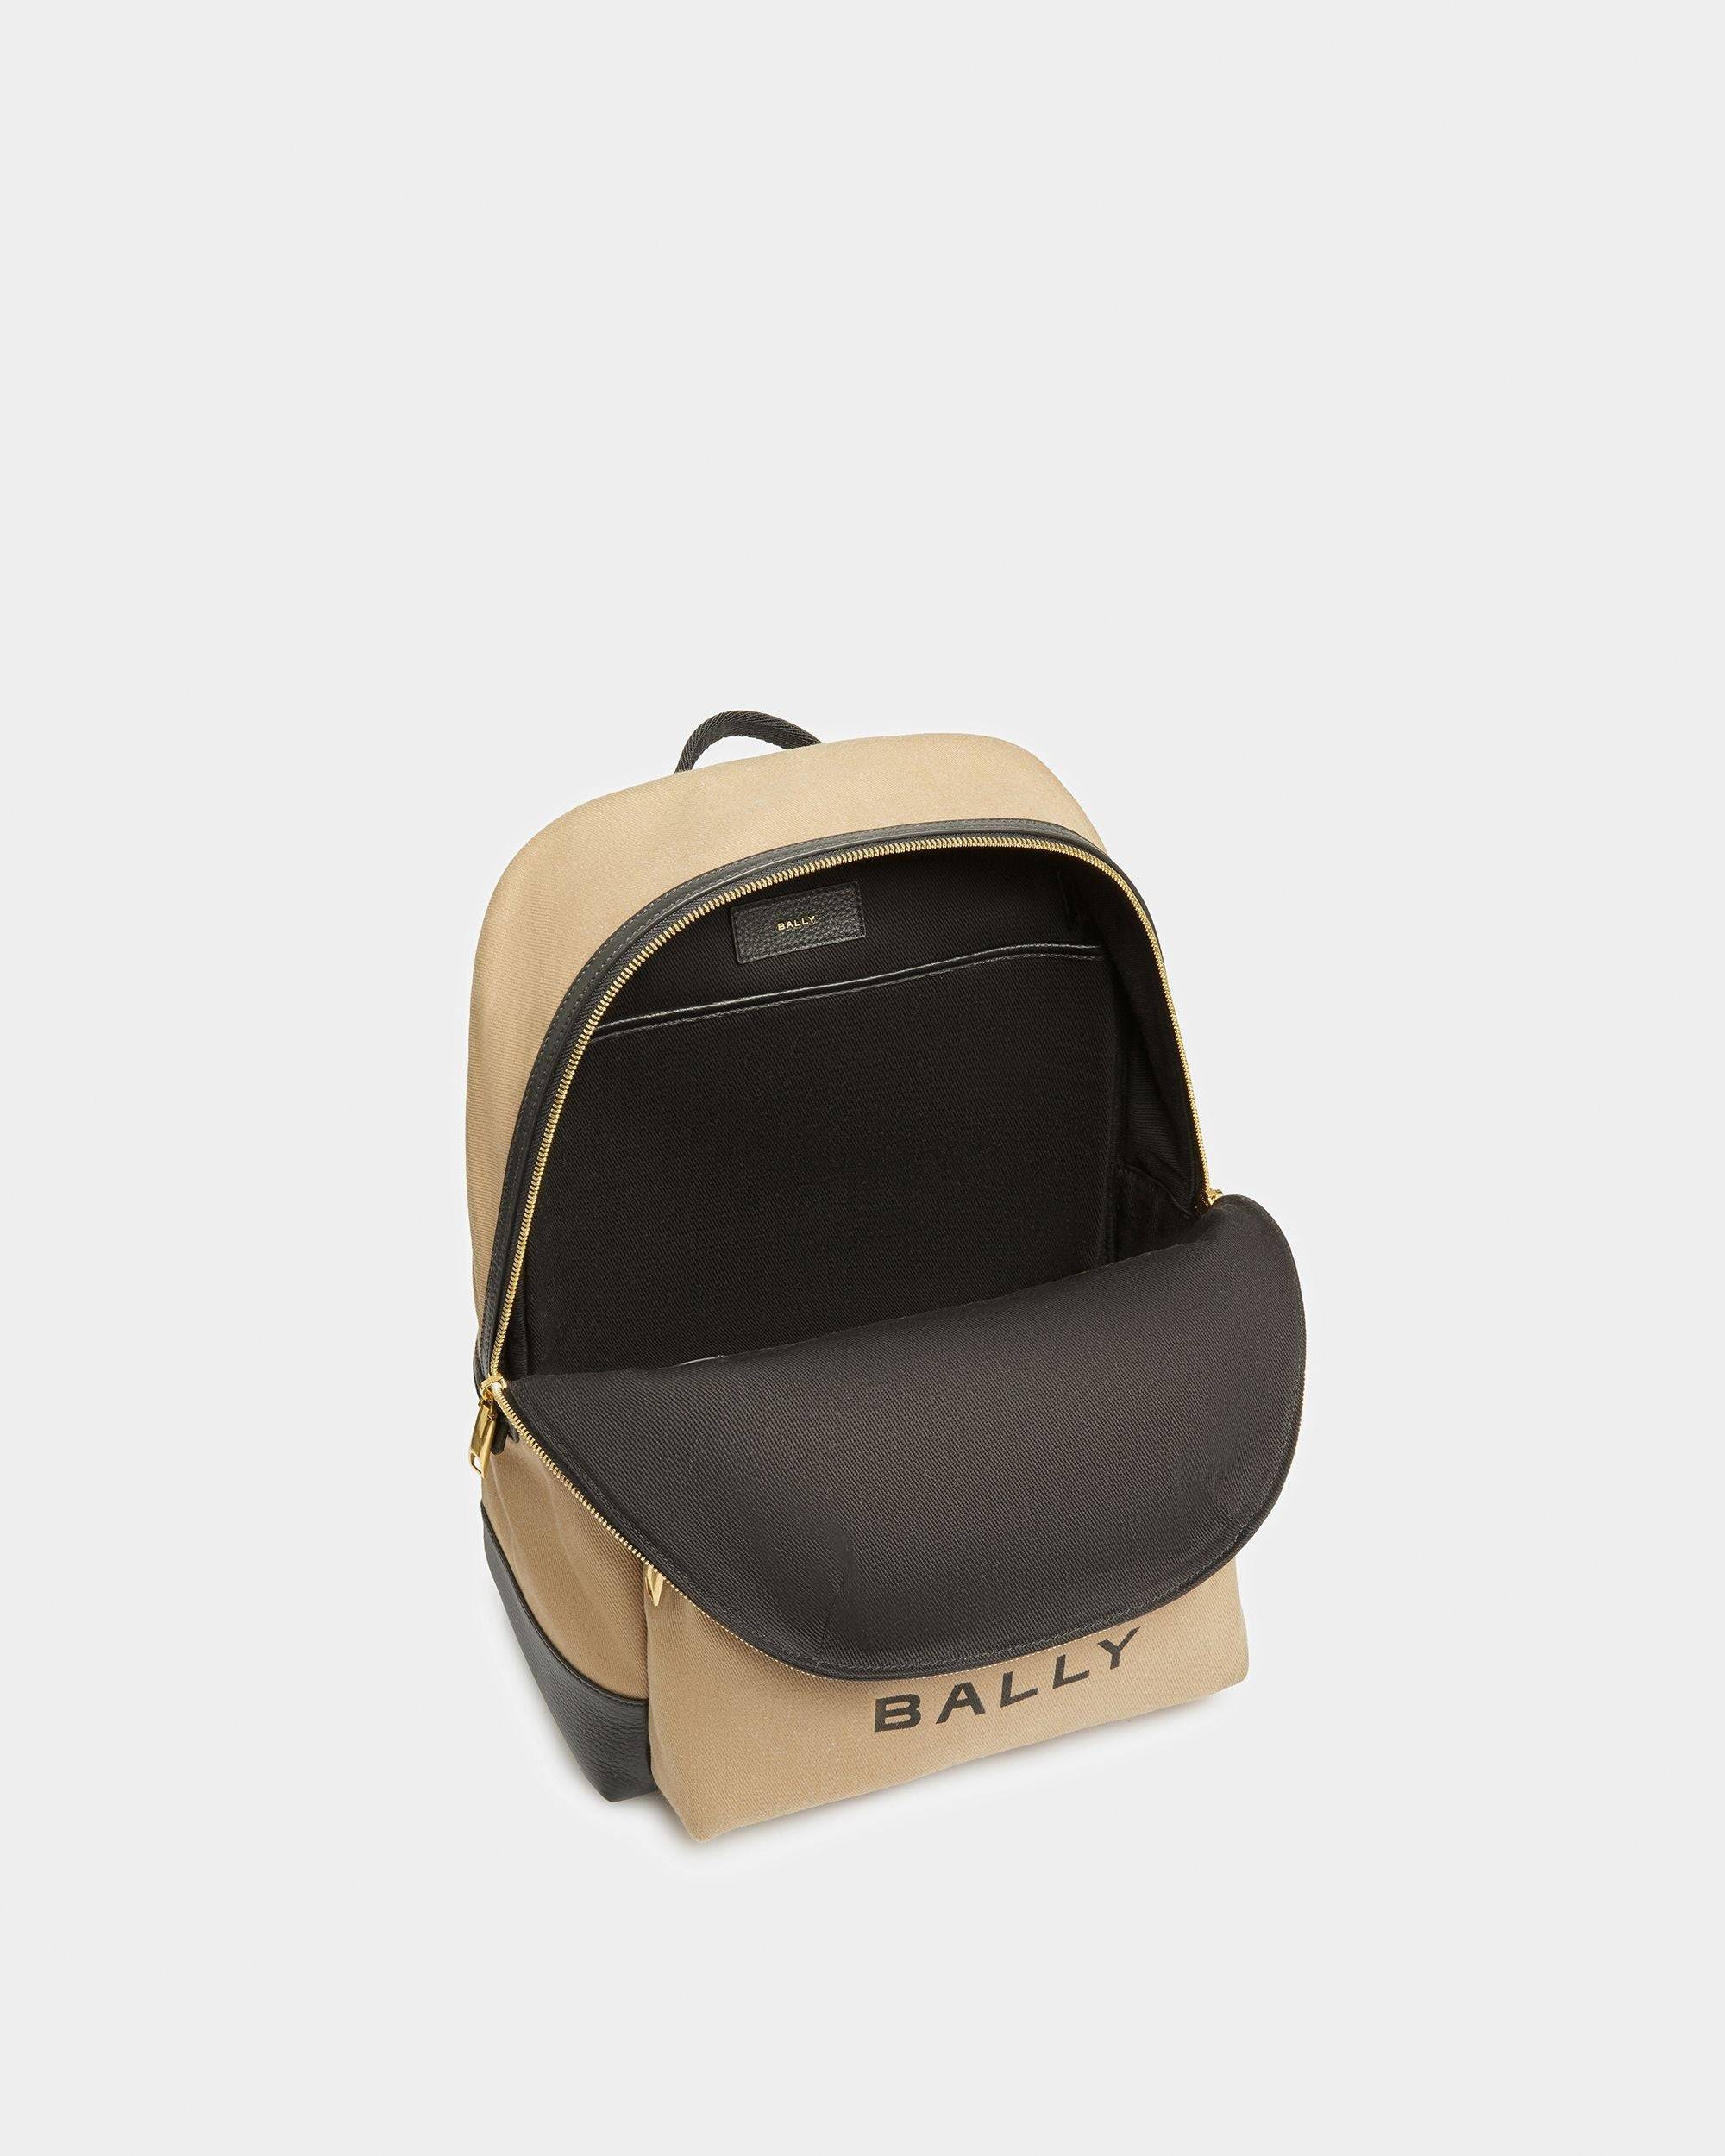 Treck | Men's Backpack | Sand And Black Fabric And Leather | Bally | Still Life Open / Inside